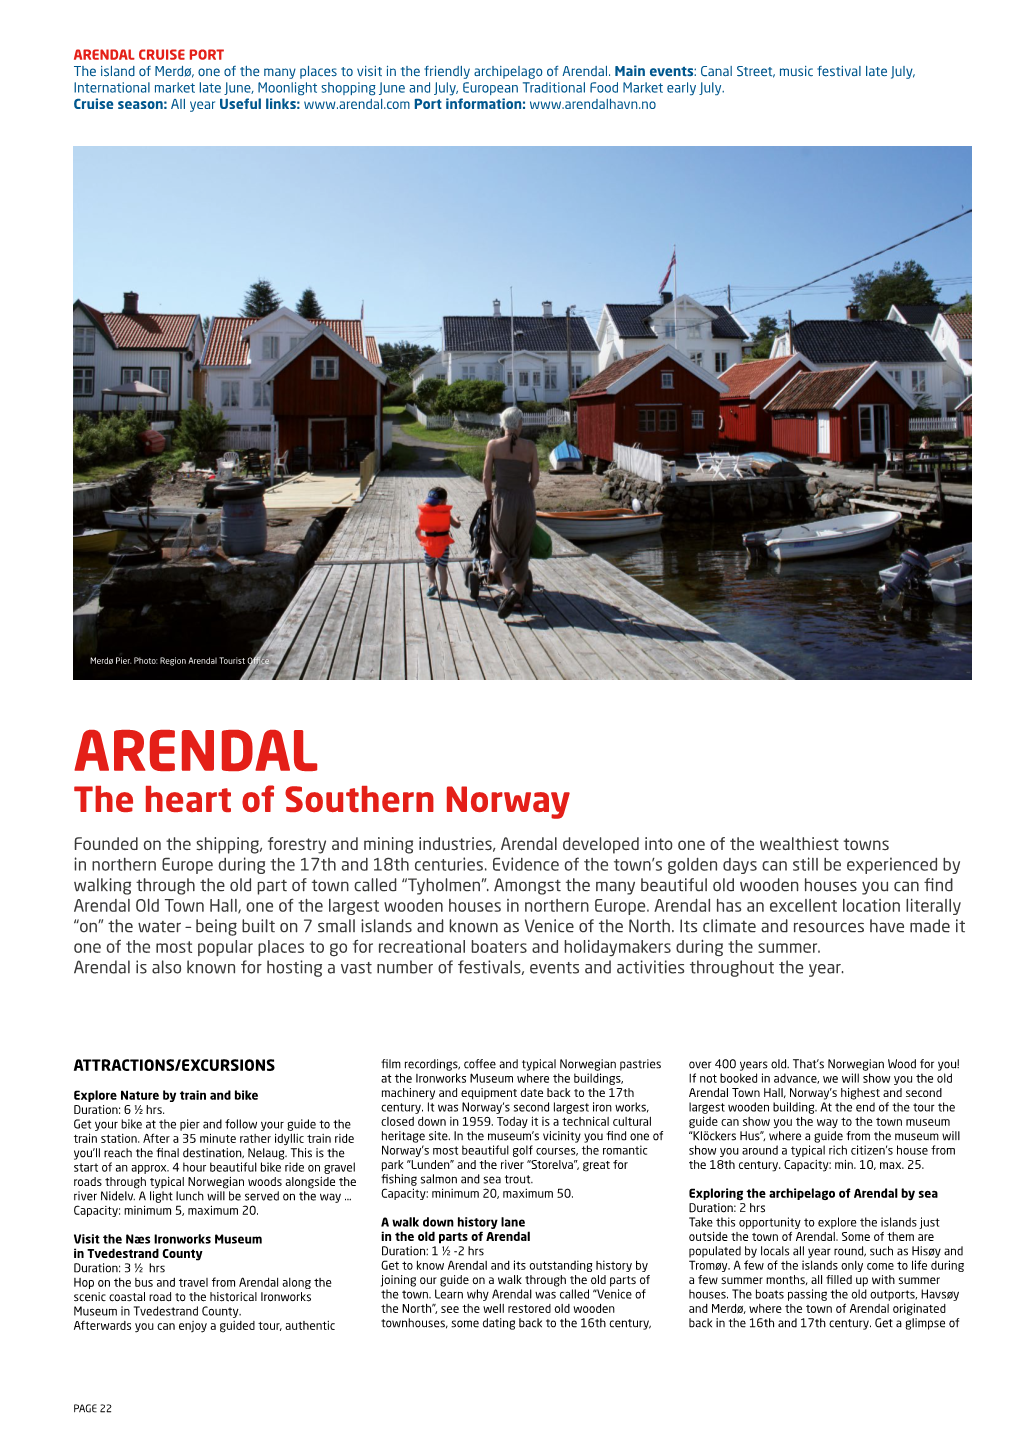 ARENDAL CRUISE PORT the Island of Merdø, One of the Many Places to Visit in the Friendly Archipelago of Arendal